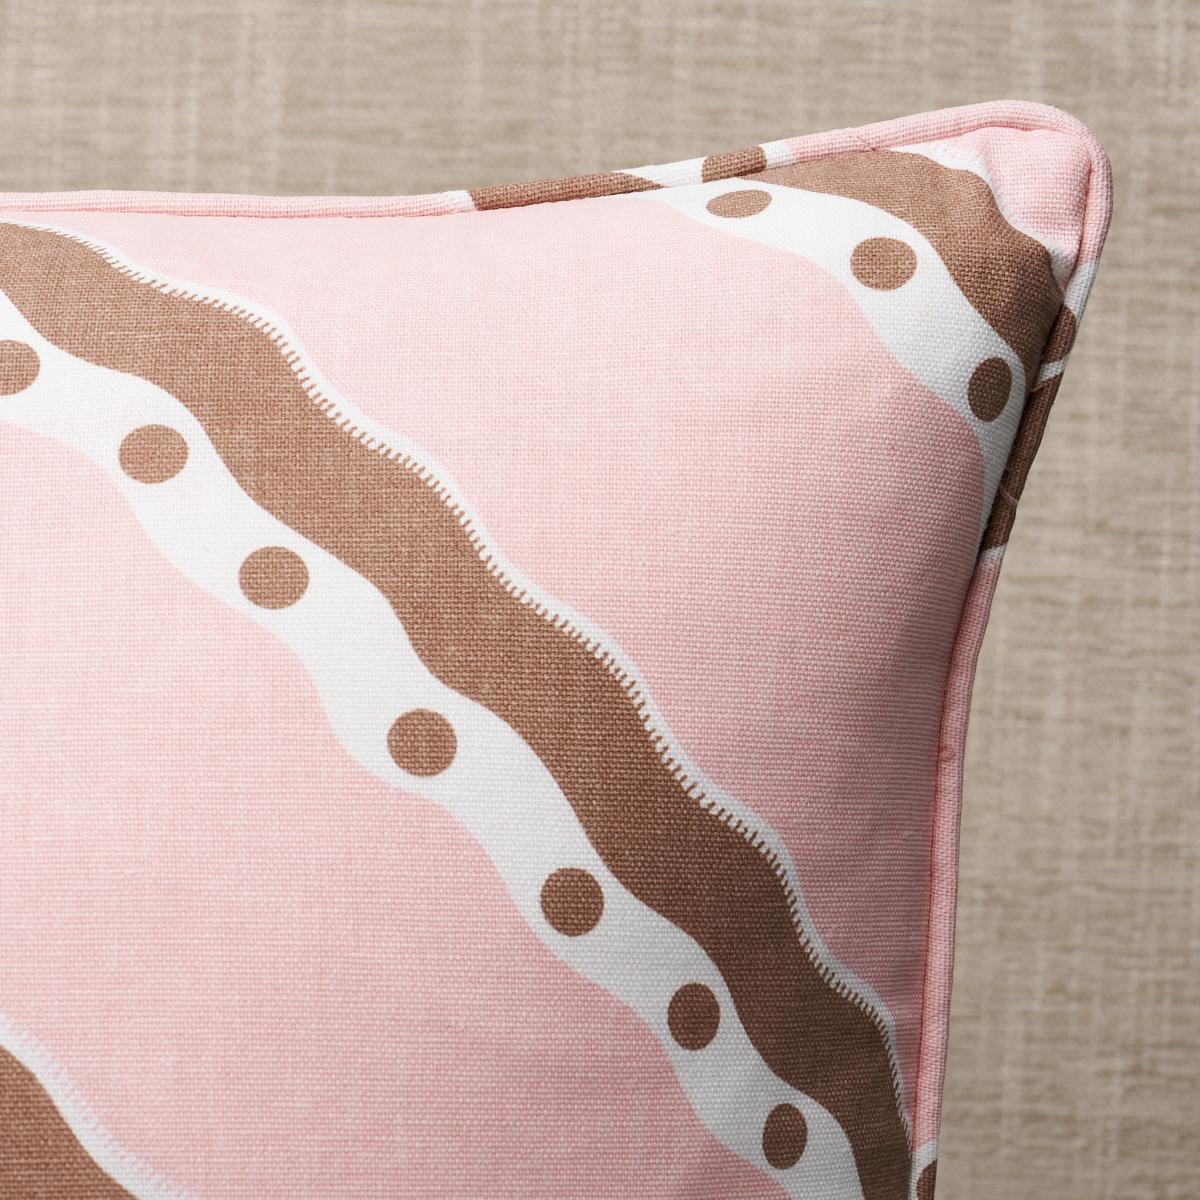 This pillow features Rousseau Stripe with a knife edge finish. Rousseau Stripe fabric is simple, charming and hard to resist. Pillow includes a feather/down fill insert and hidden zipper closure.